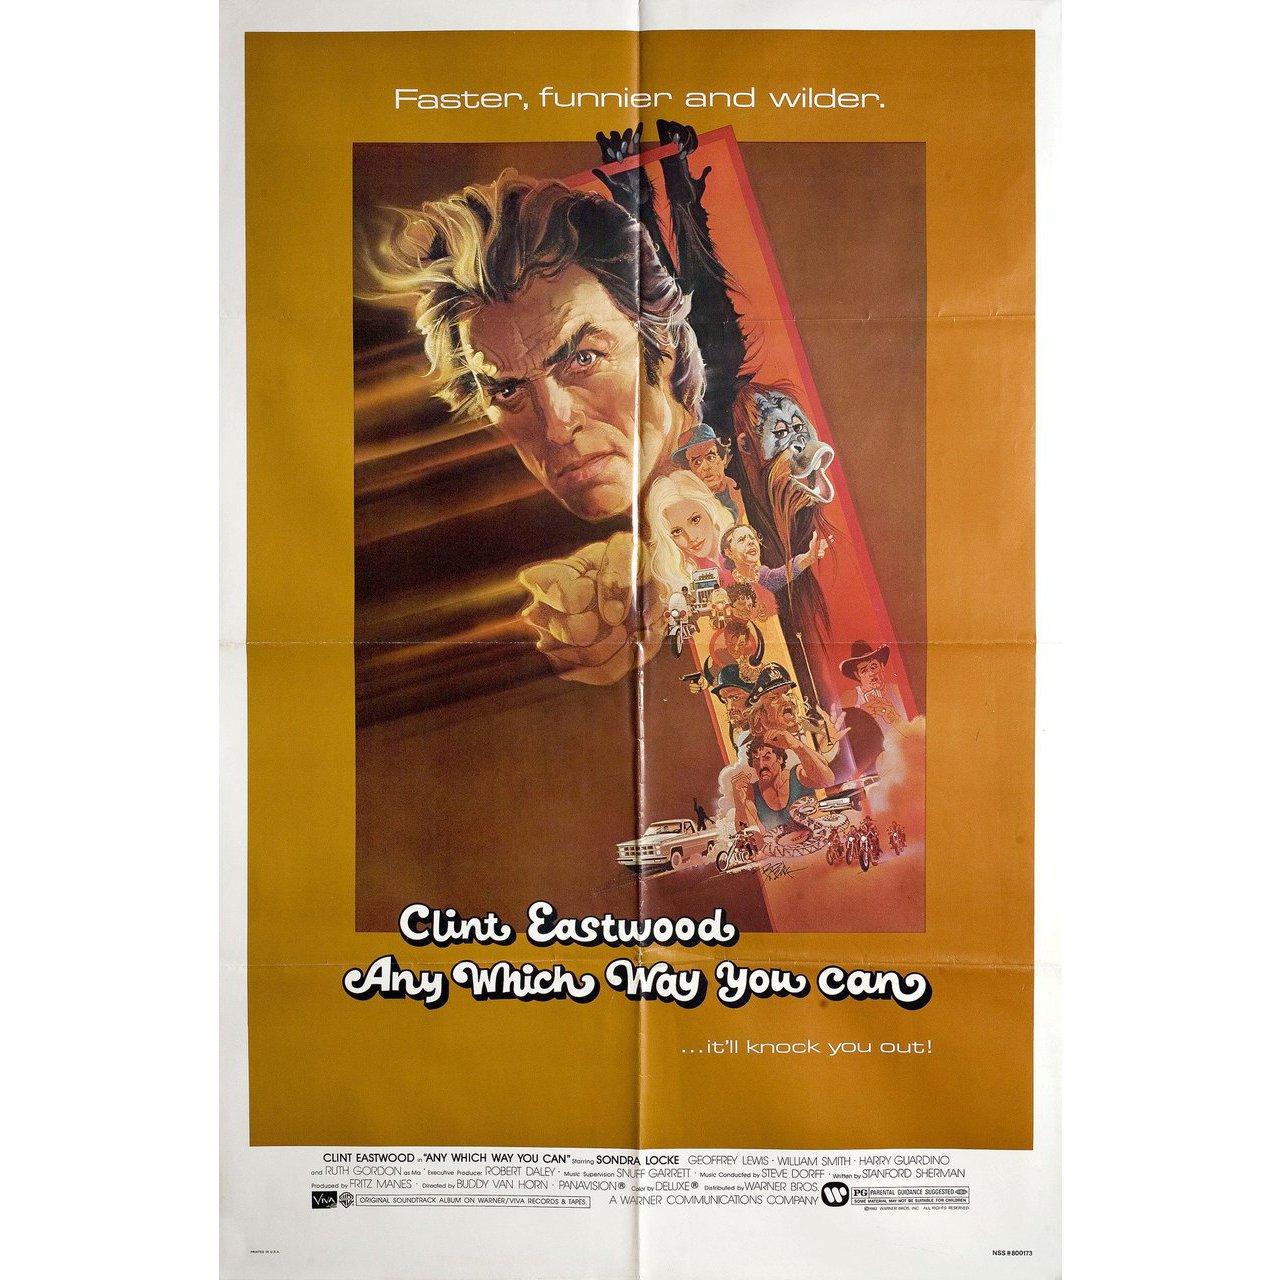 Original 1980 U.S. one sheet poster by Bob Peak for. Very good-fine condition, folded. Many original posters were issued folded or were subsequently folded. Please note: the size is stated in inches and the actual size can vary by an inch or